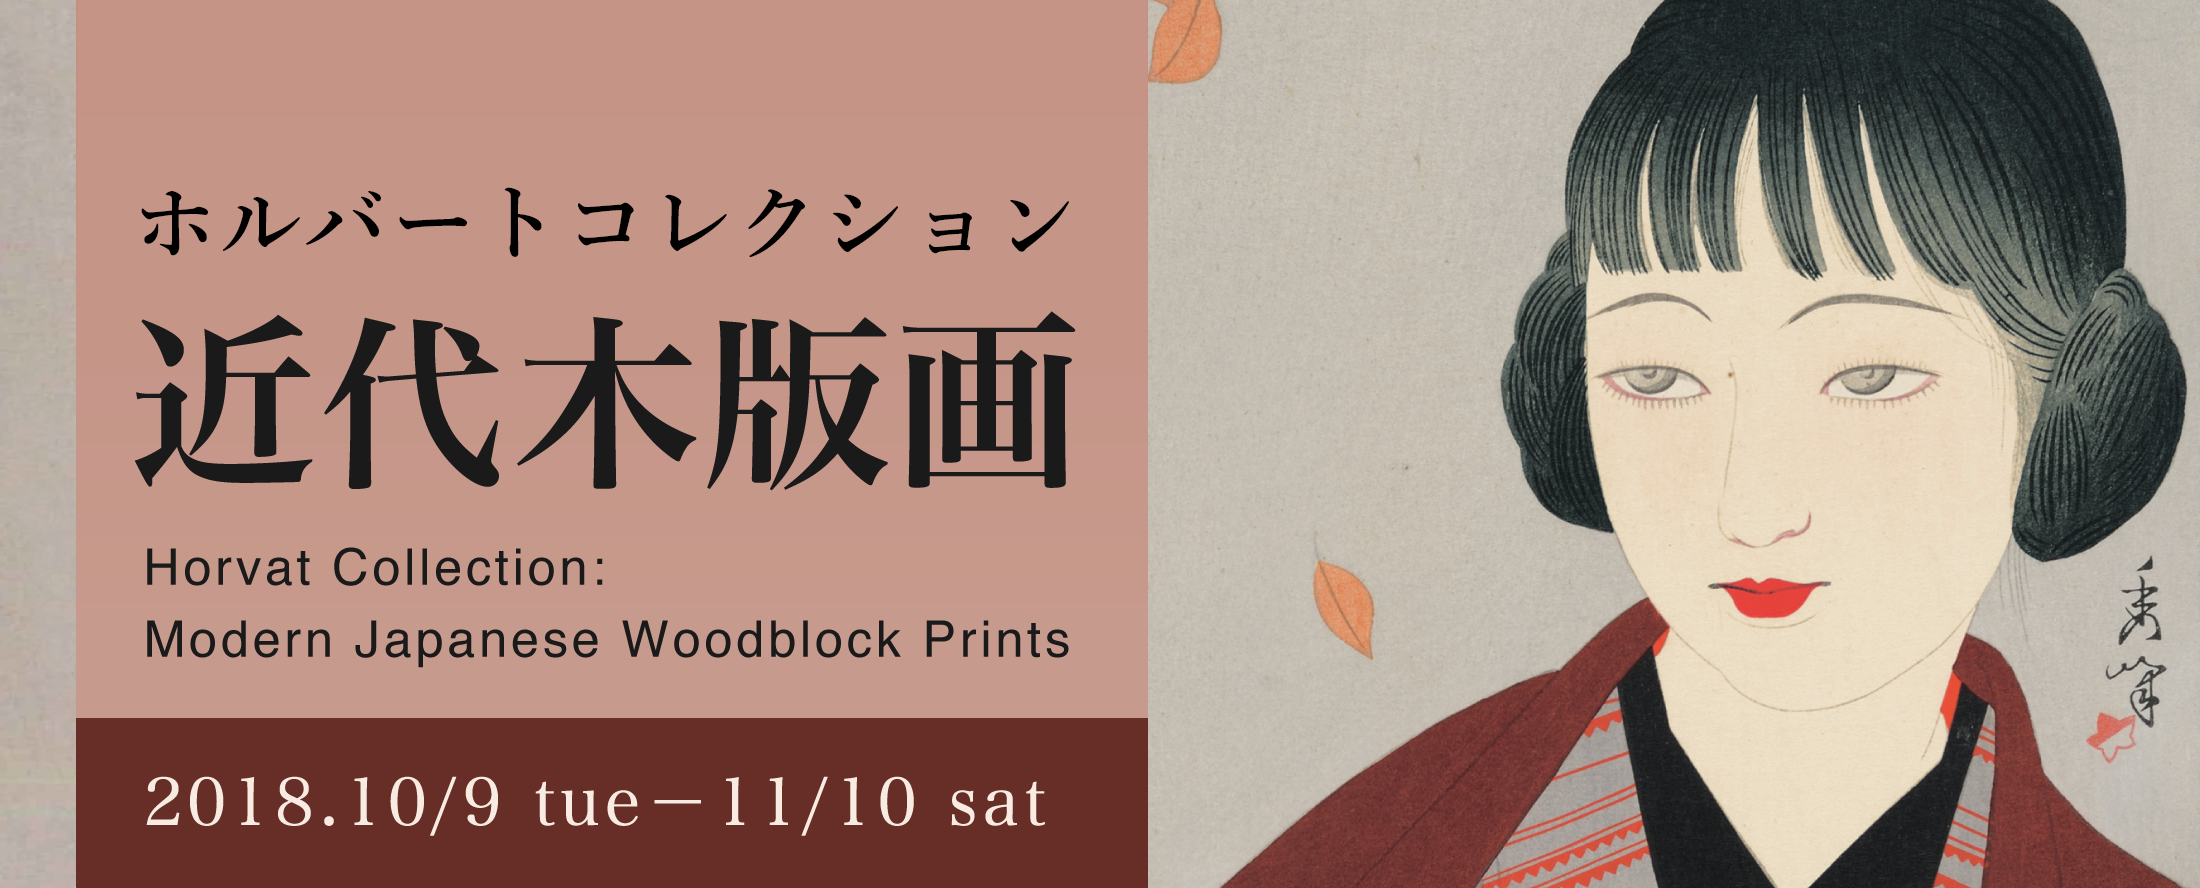 Horvat Collection: Modern Japanese Woodblock Prints
